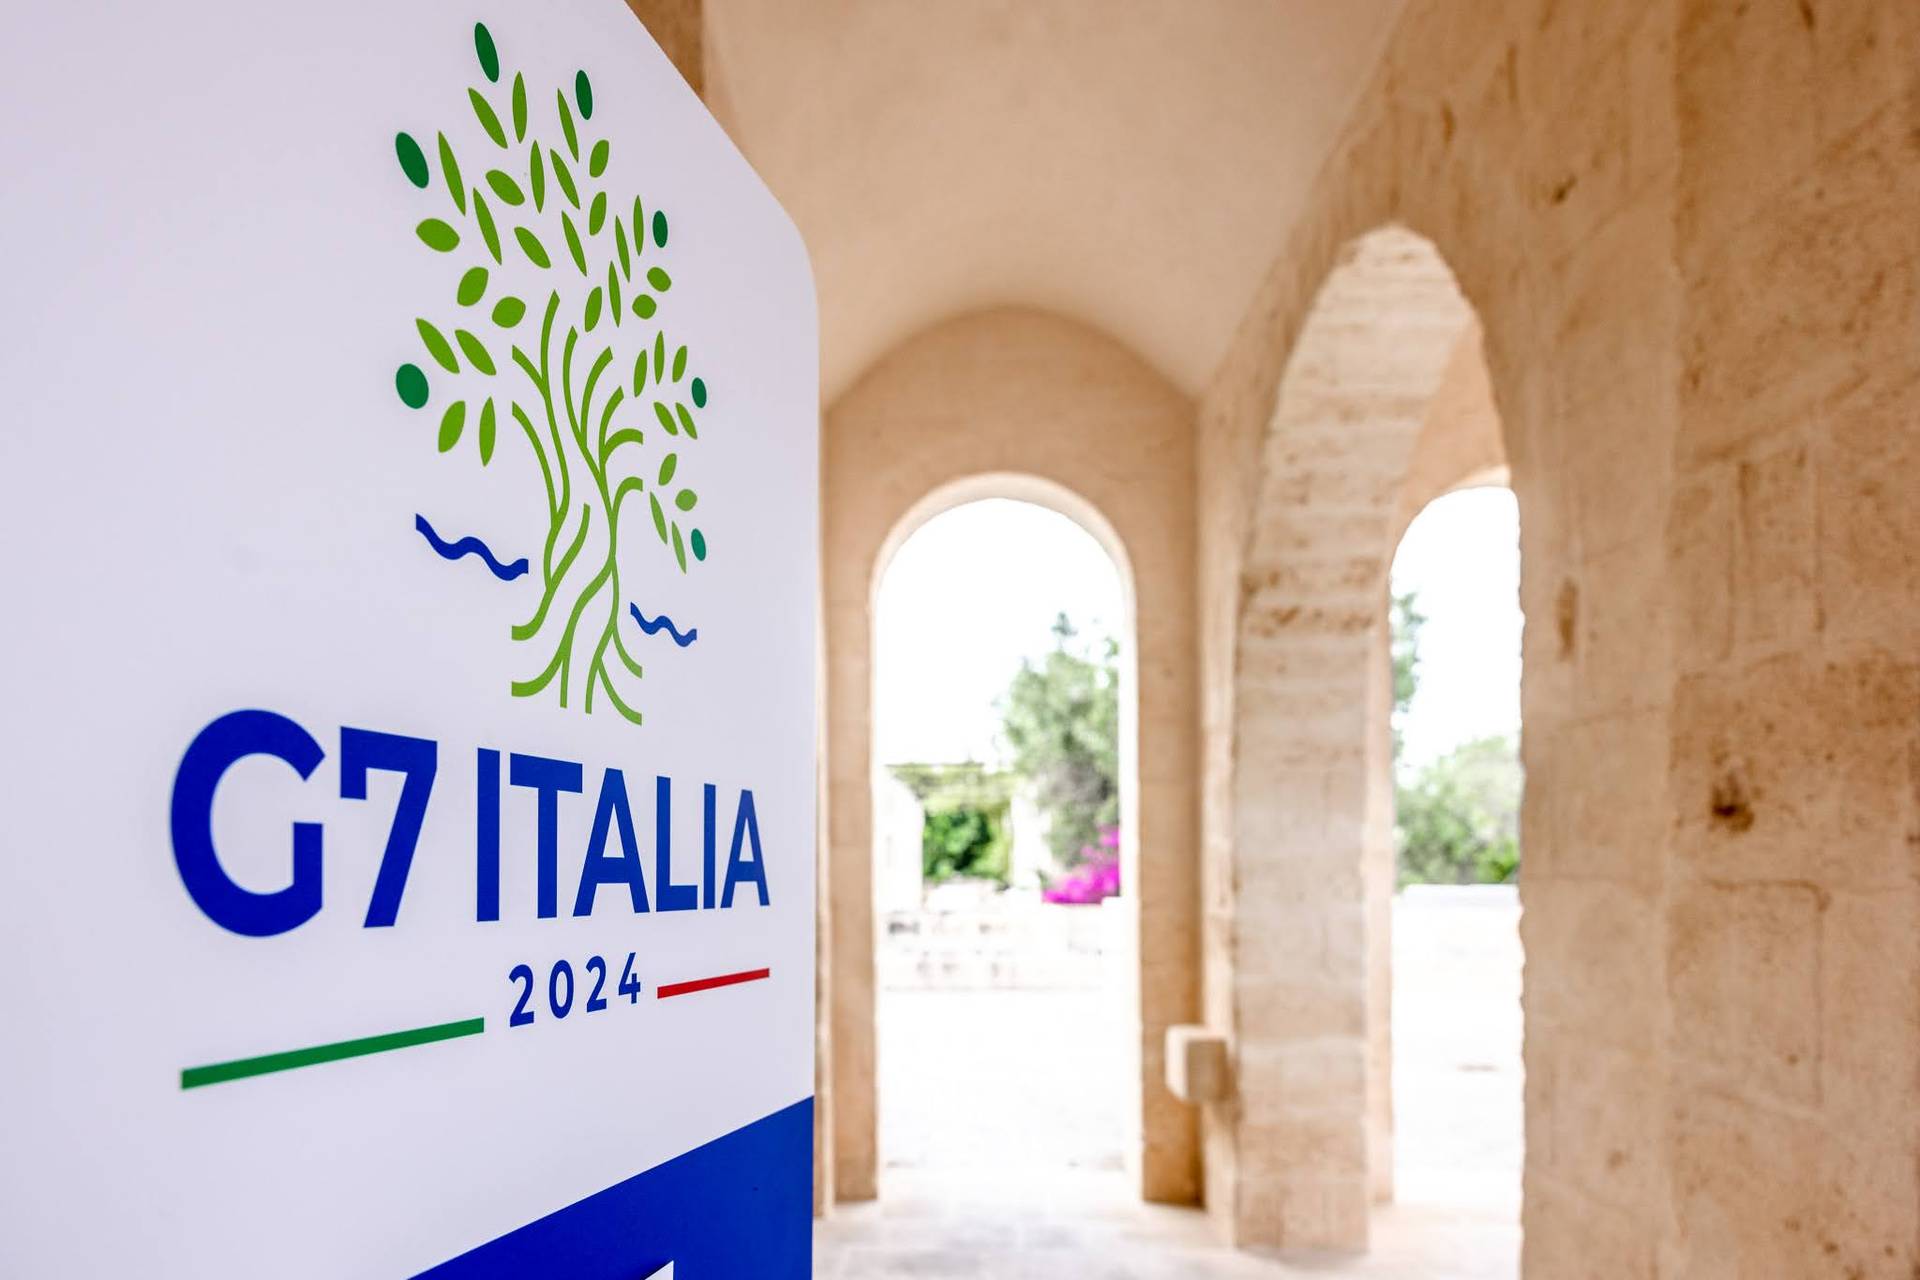 The G7 Summit is taking place in Borgo Egnazia, Italy June 13-14. (Credit: G7 Italia.)